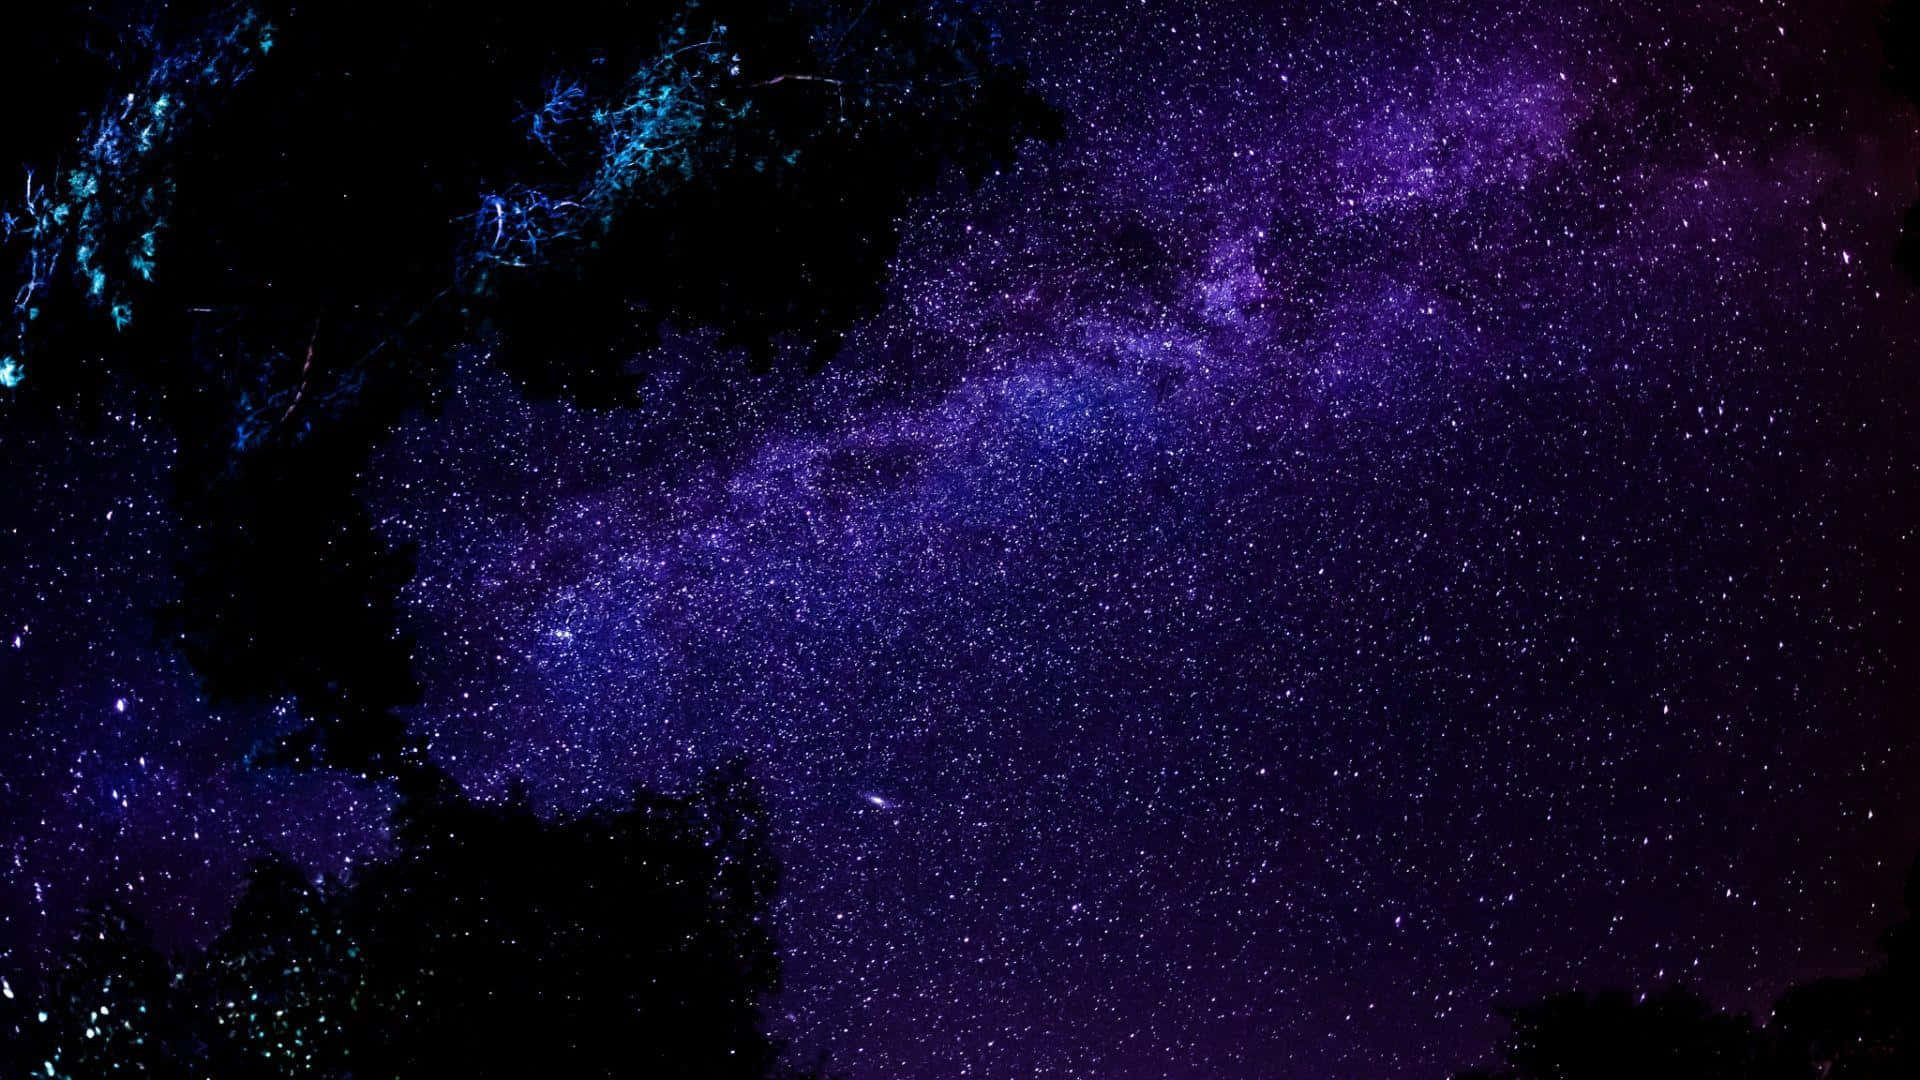 Take a trip into the expanse of Purple Space